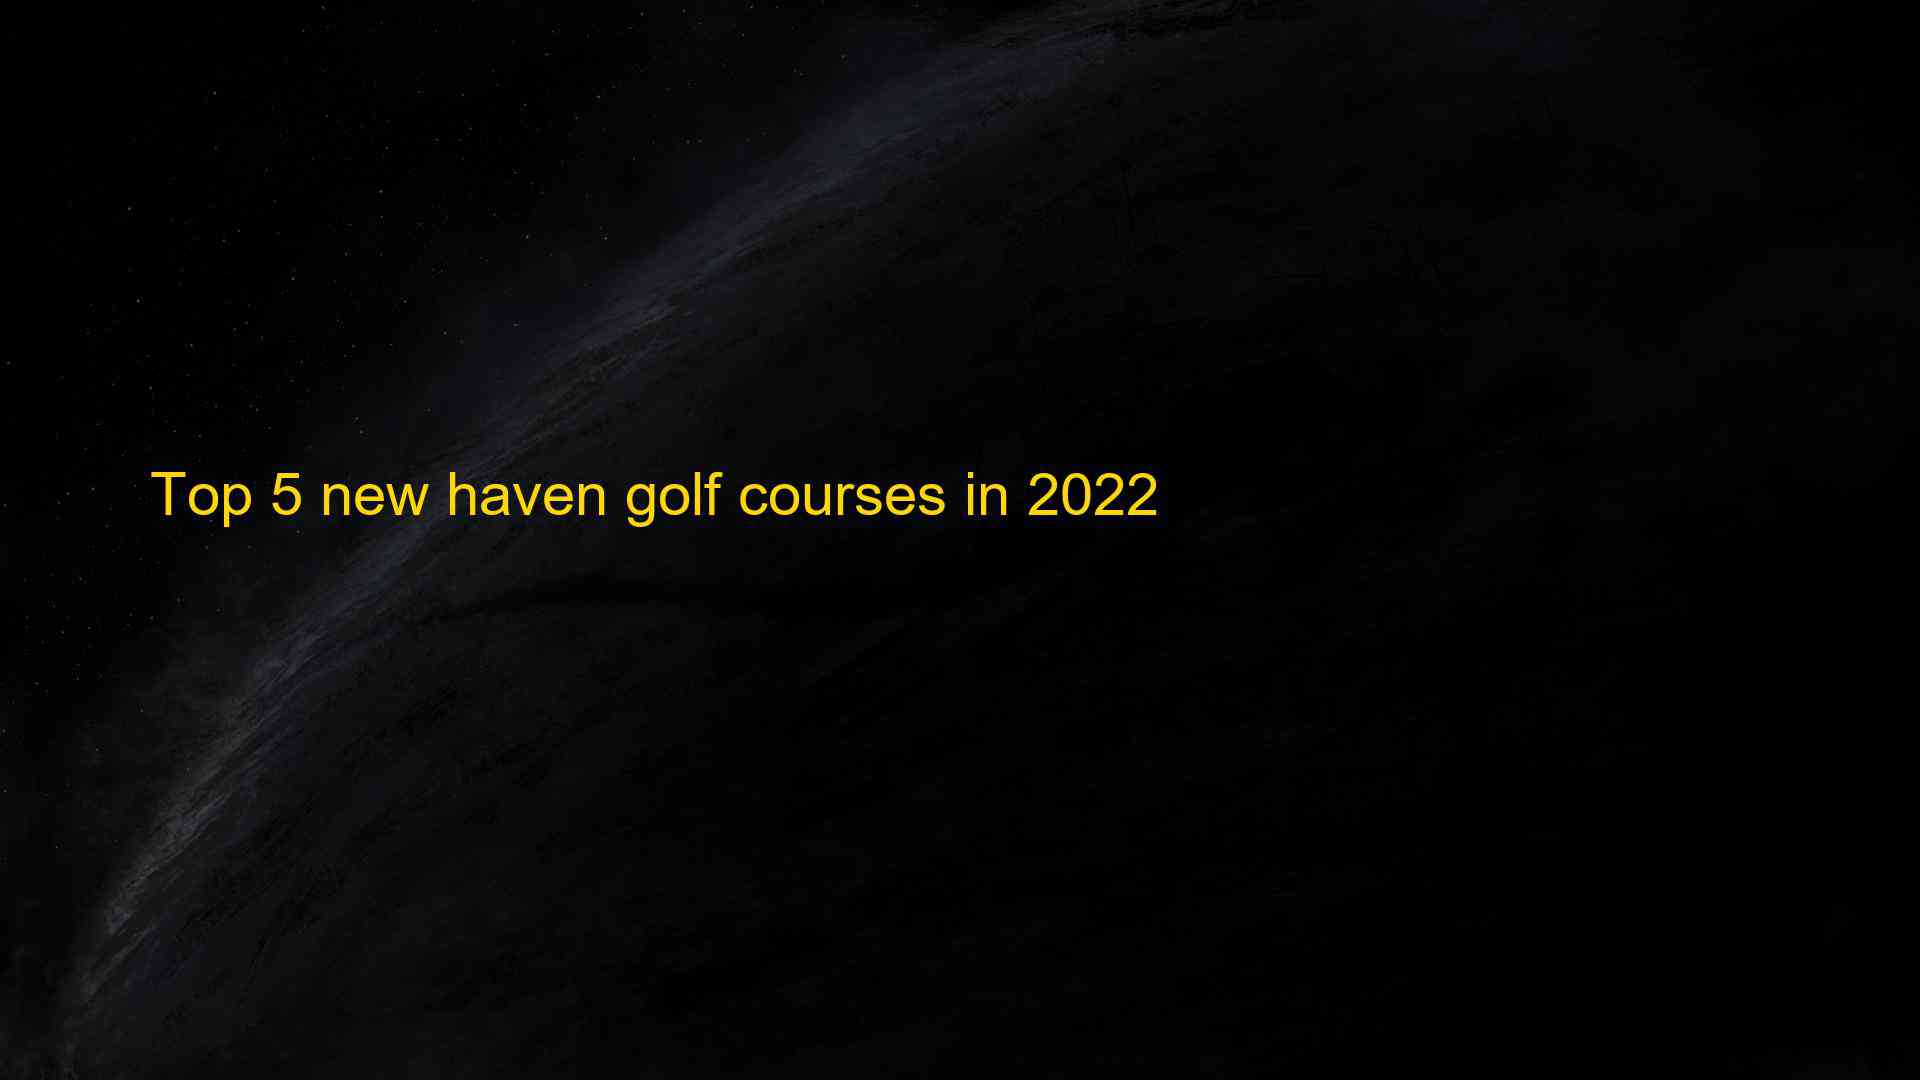 Top 5 new haven golf courses in 2022 1661786321